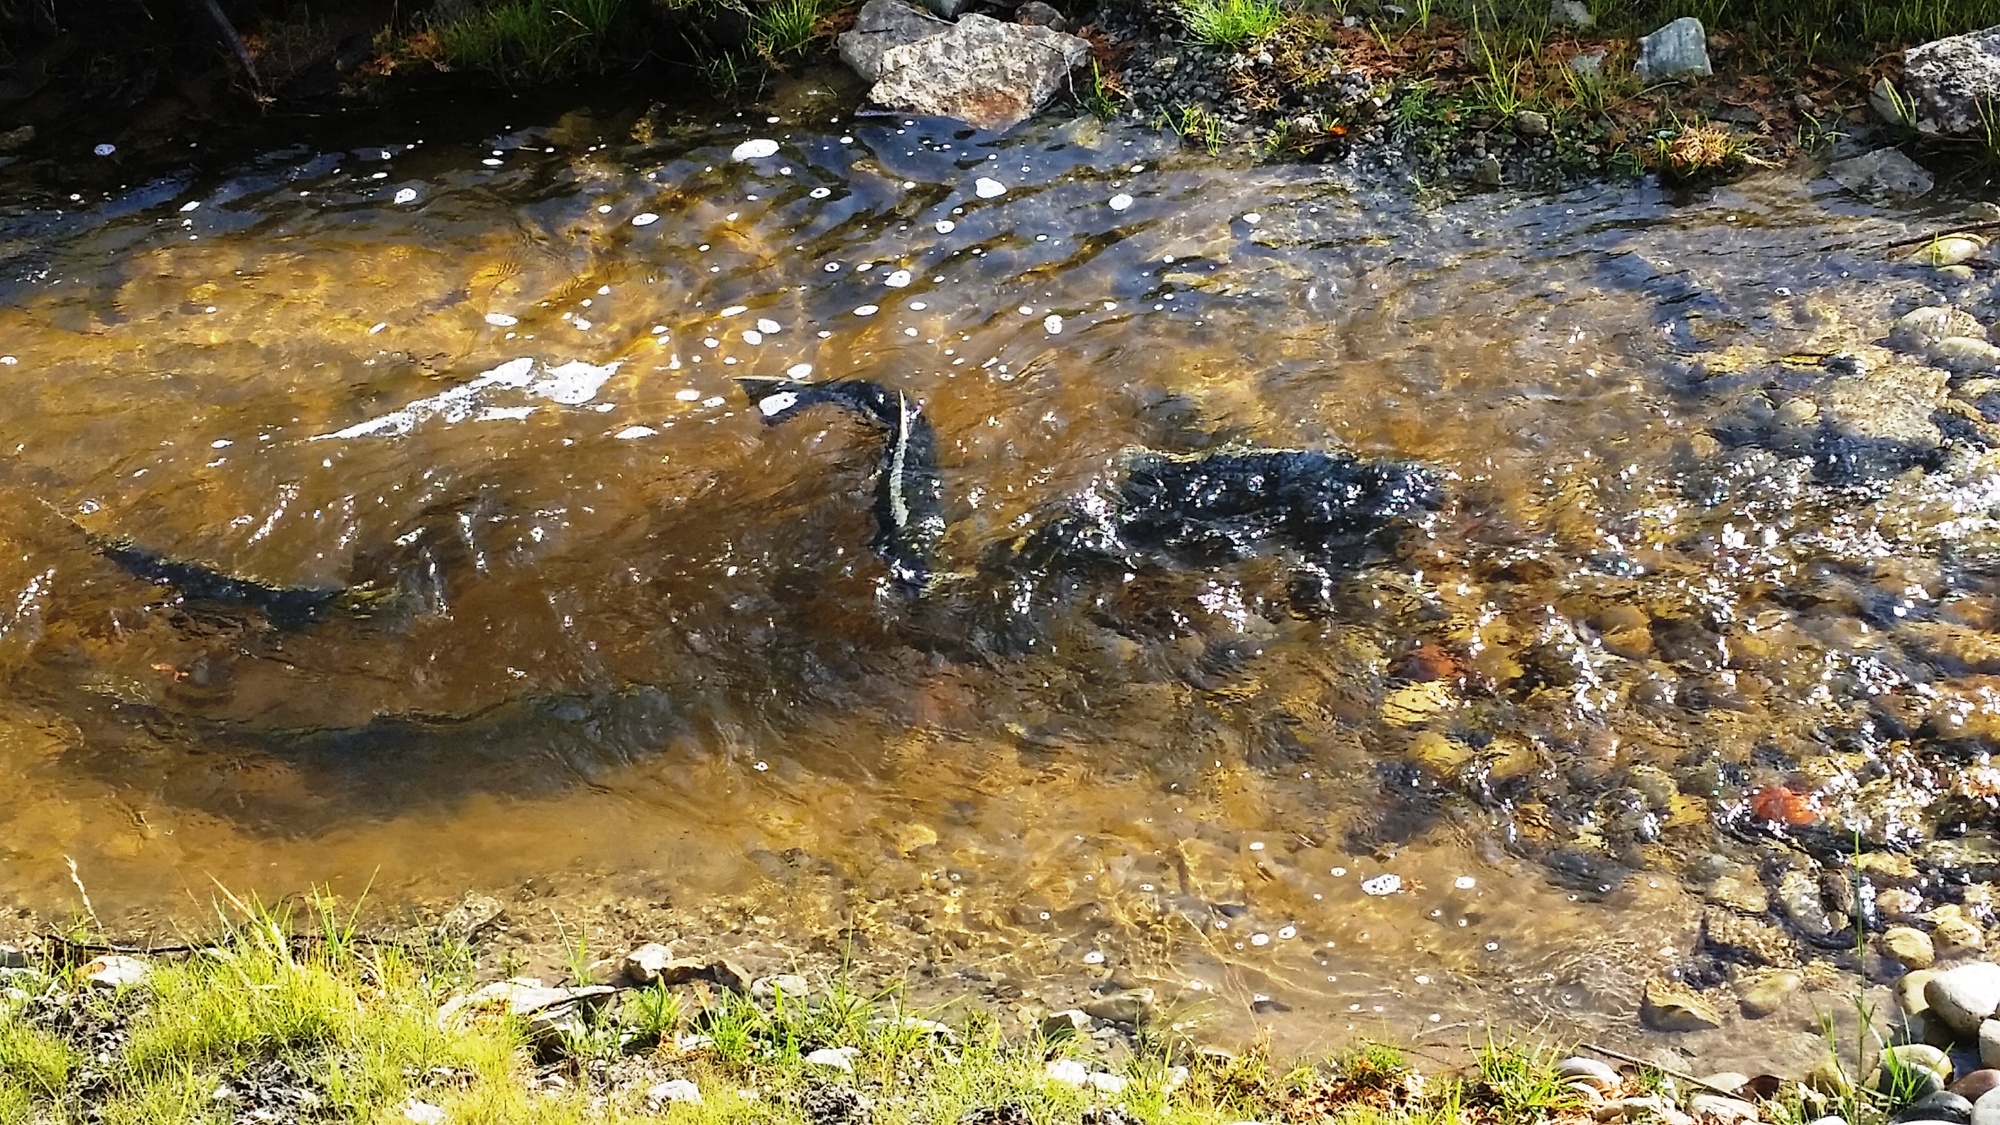 Chinook salmon are shown swimming over the gravel bottom of Williams Creek in autumn 2015, the result of a dam removal and stream restoration project.